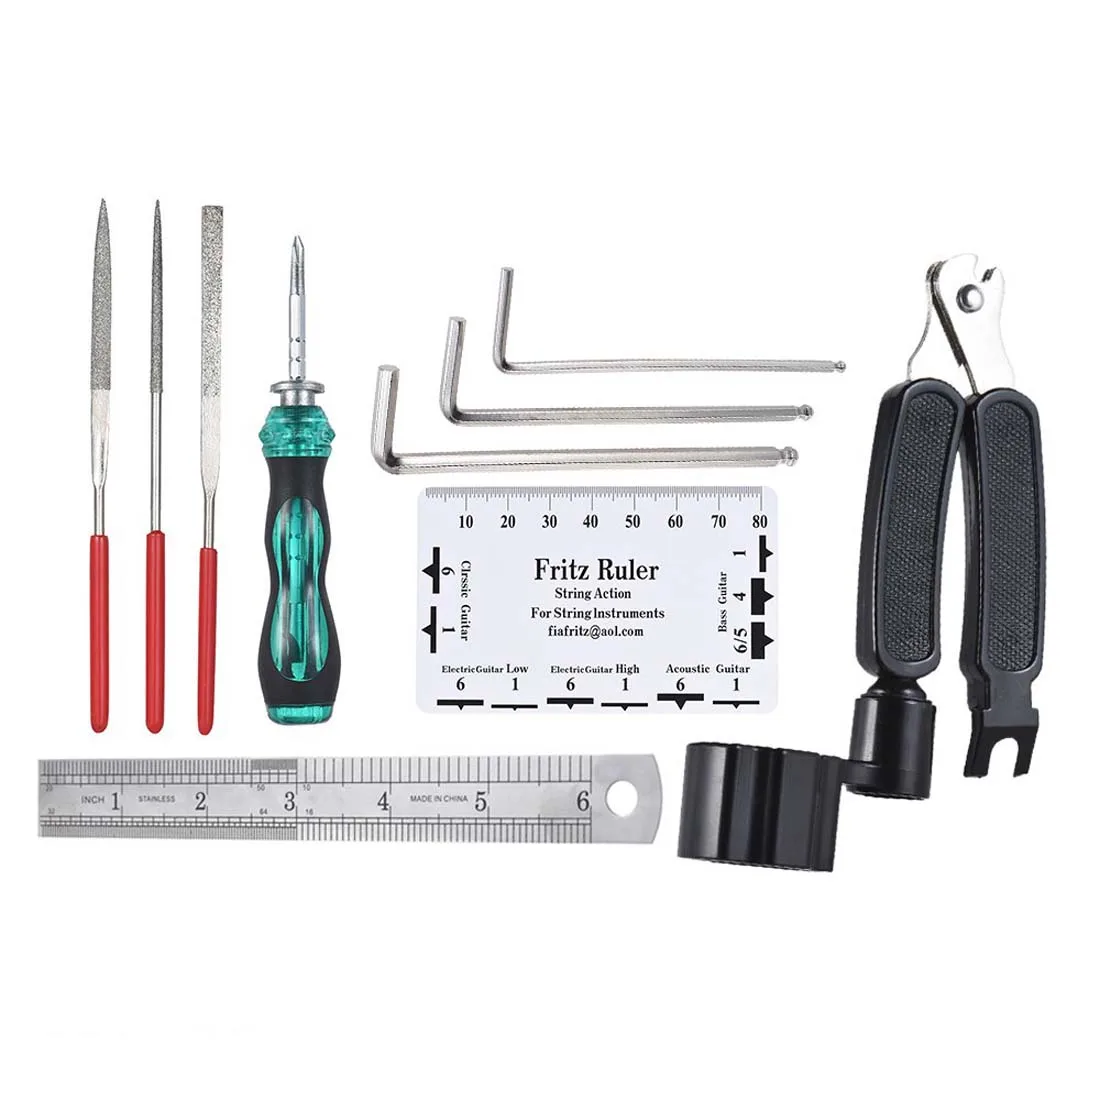 

Guitar Kit, File Wrench, Chord Distance Ruler, String Cutter, Maintenance And Repair Kit, Accessory Set